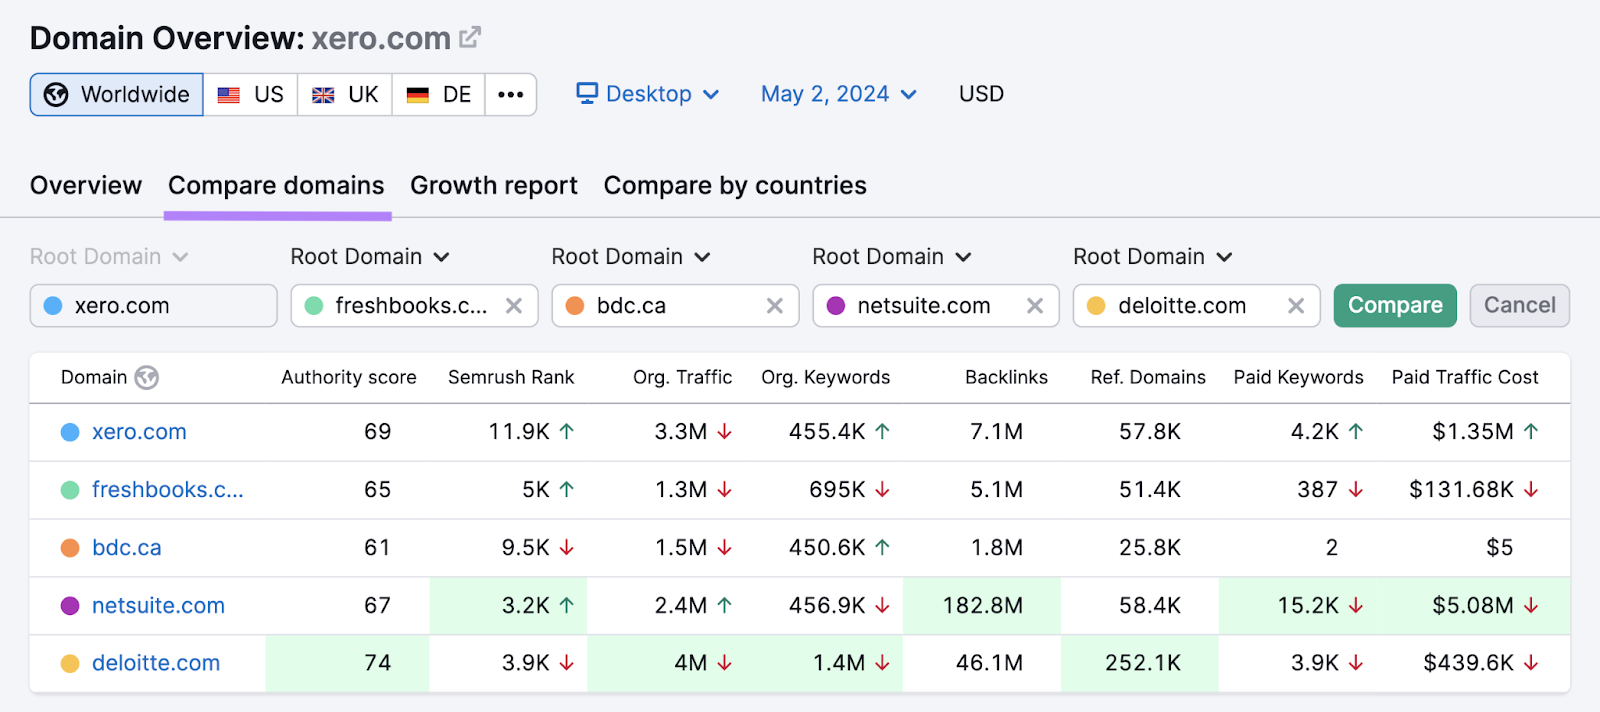 comparing domains deloitte.com is ahead of xero.com on authority score, organic traffic, and organic keywords